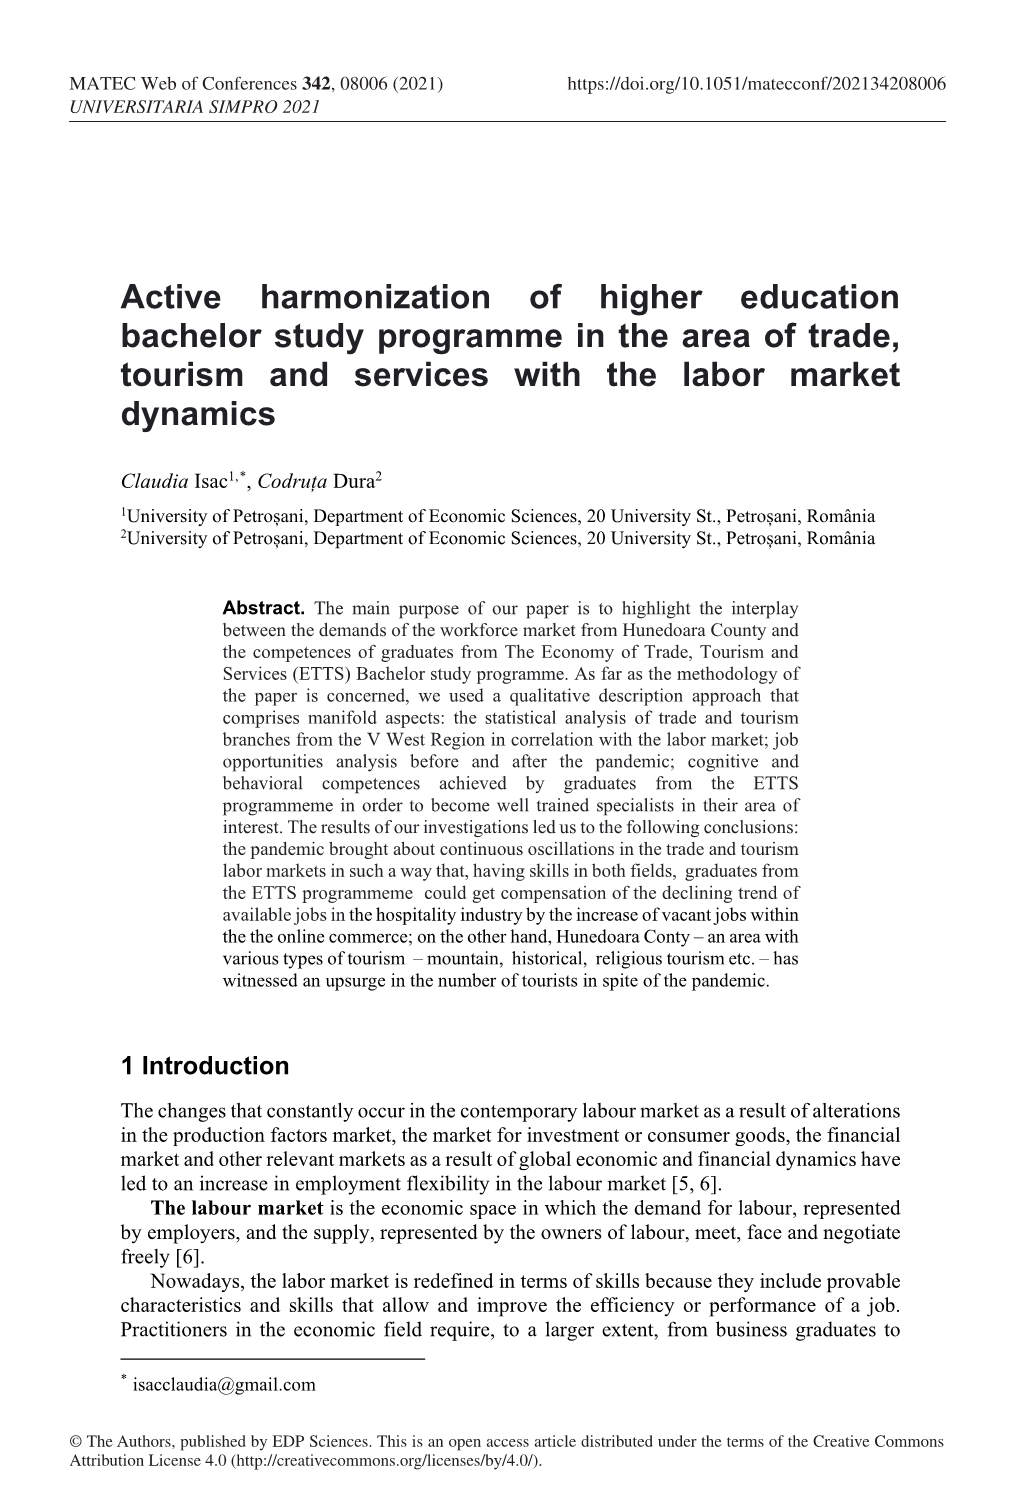 Active Harmonization of Higher Education Bachelor Study Programme in the Area of Trade, Tourism and Services with the Labor Market Dynamics